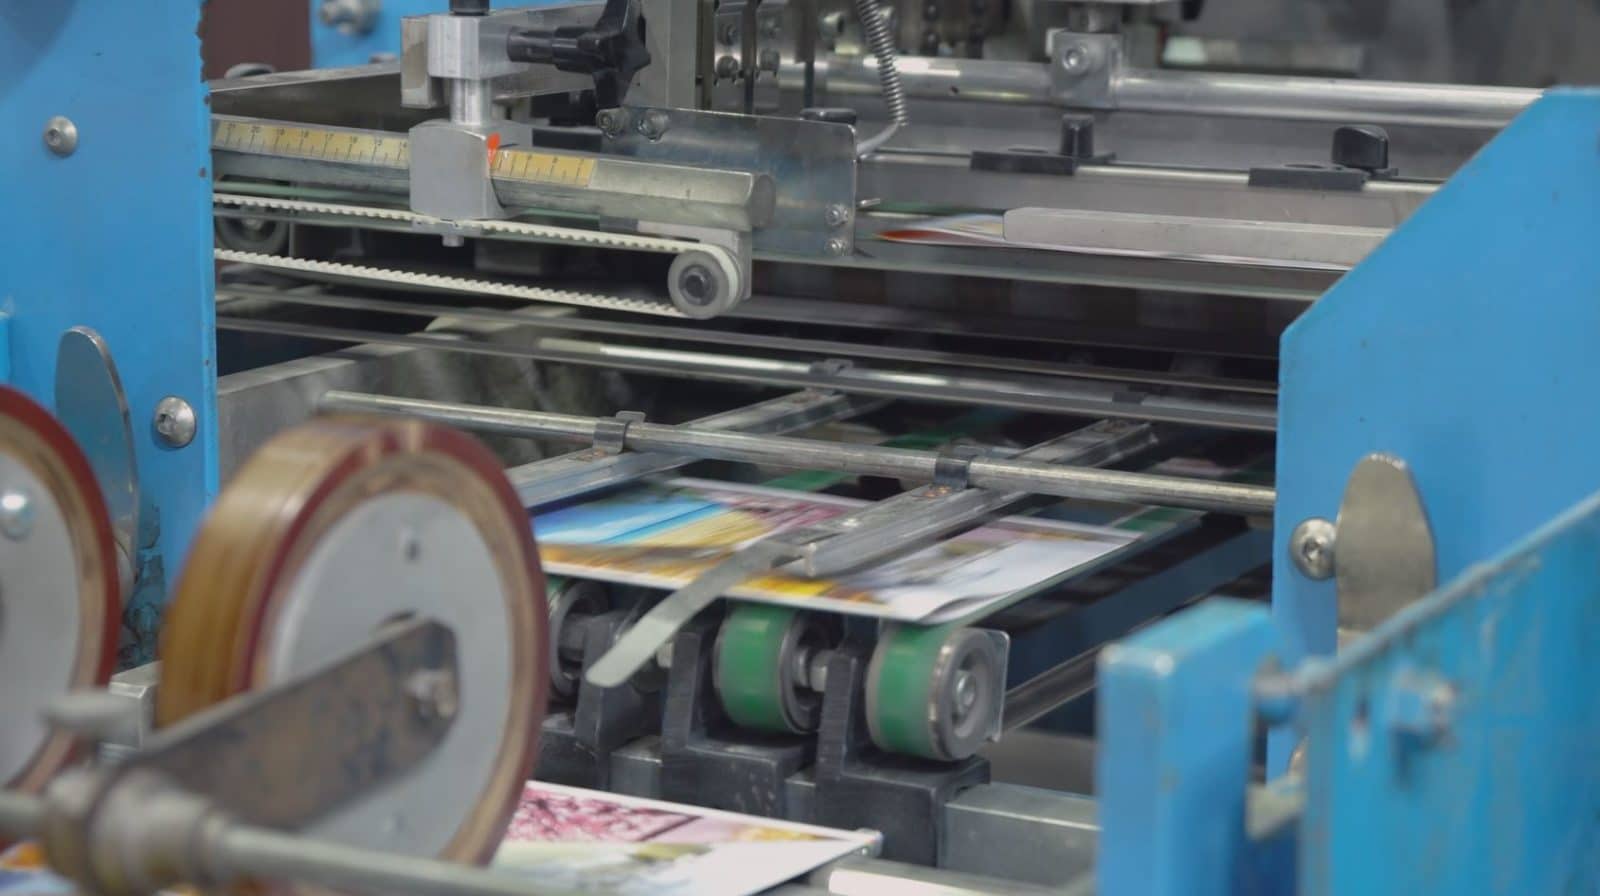 The process of printing in a Brochure printing company